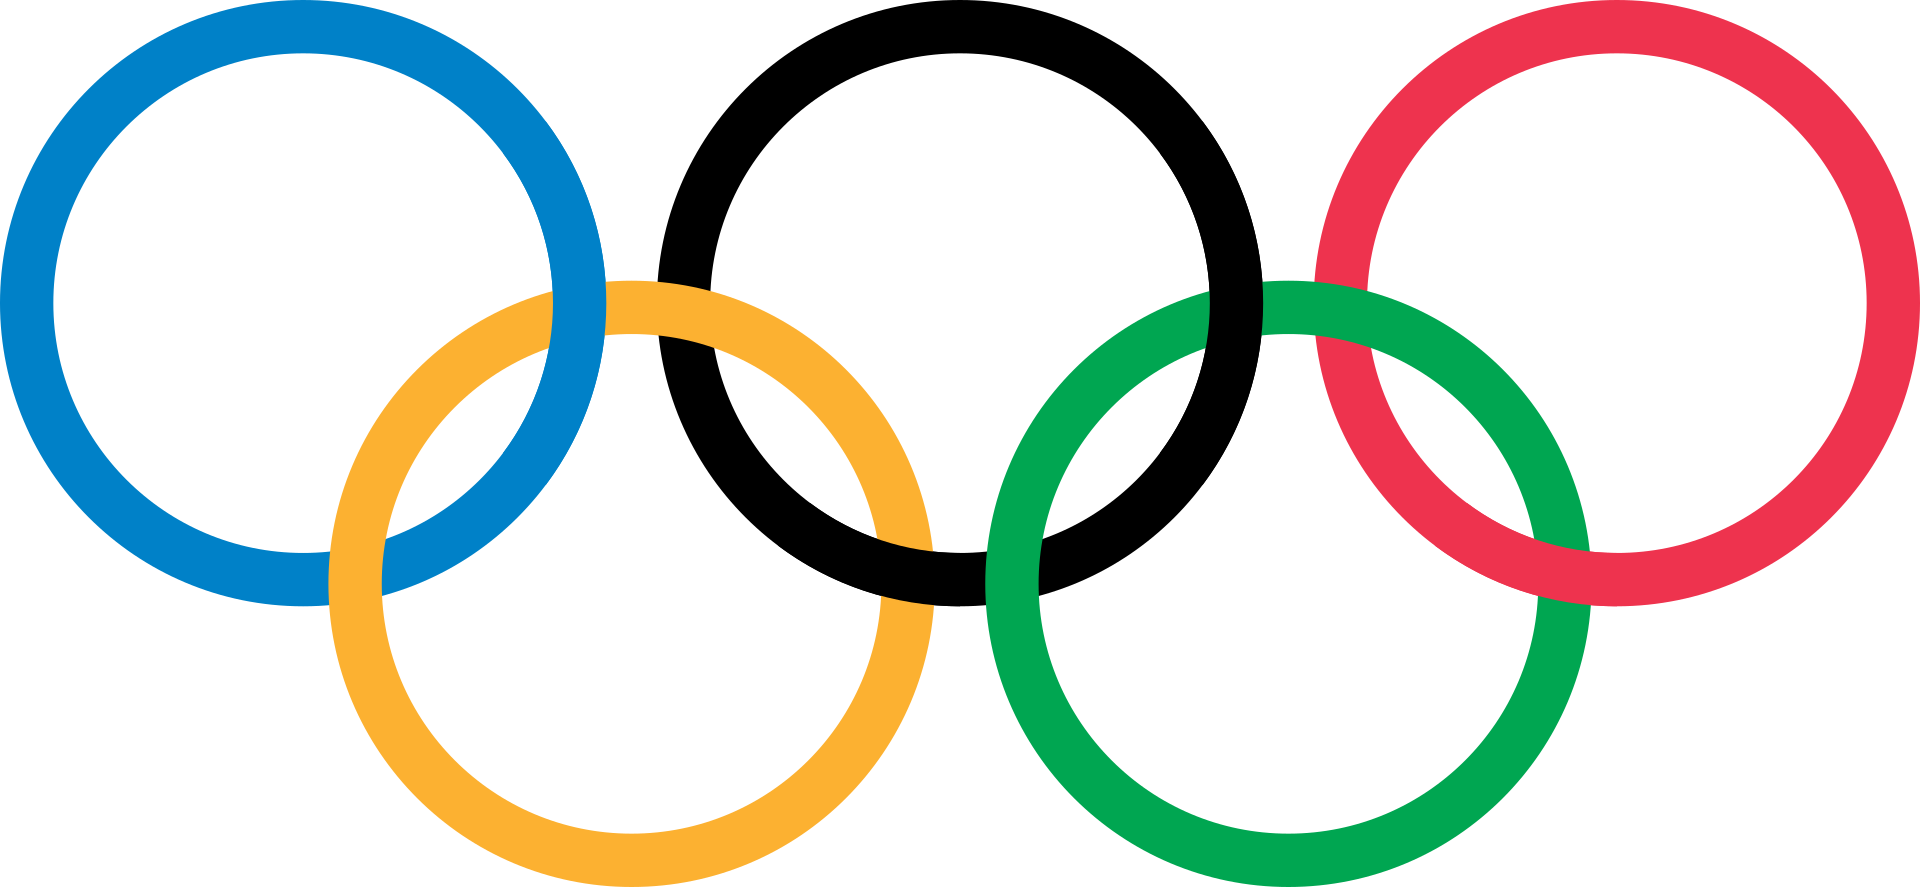 The olympic rings symbols